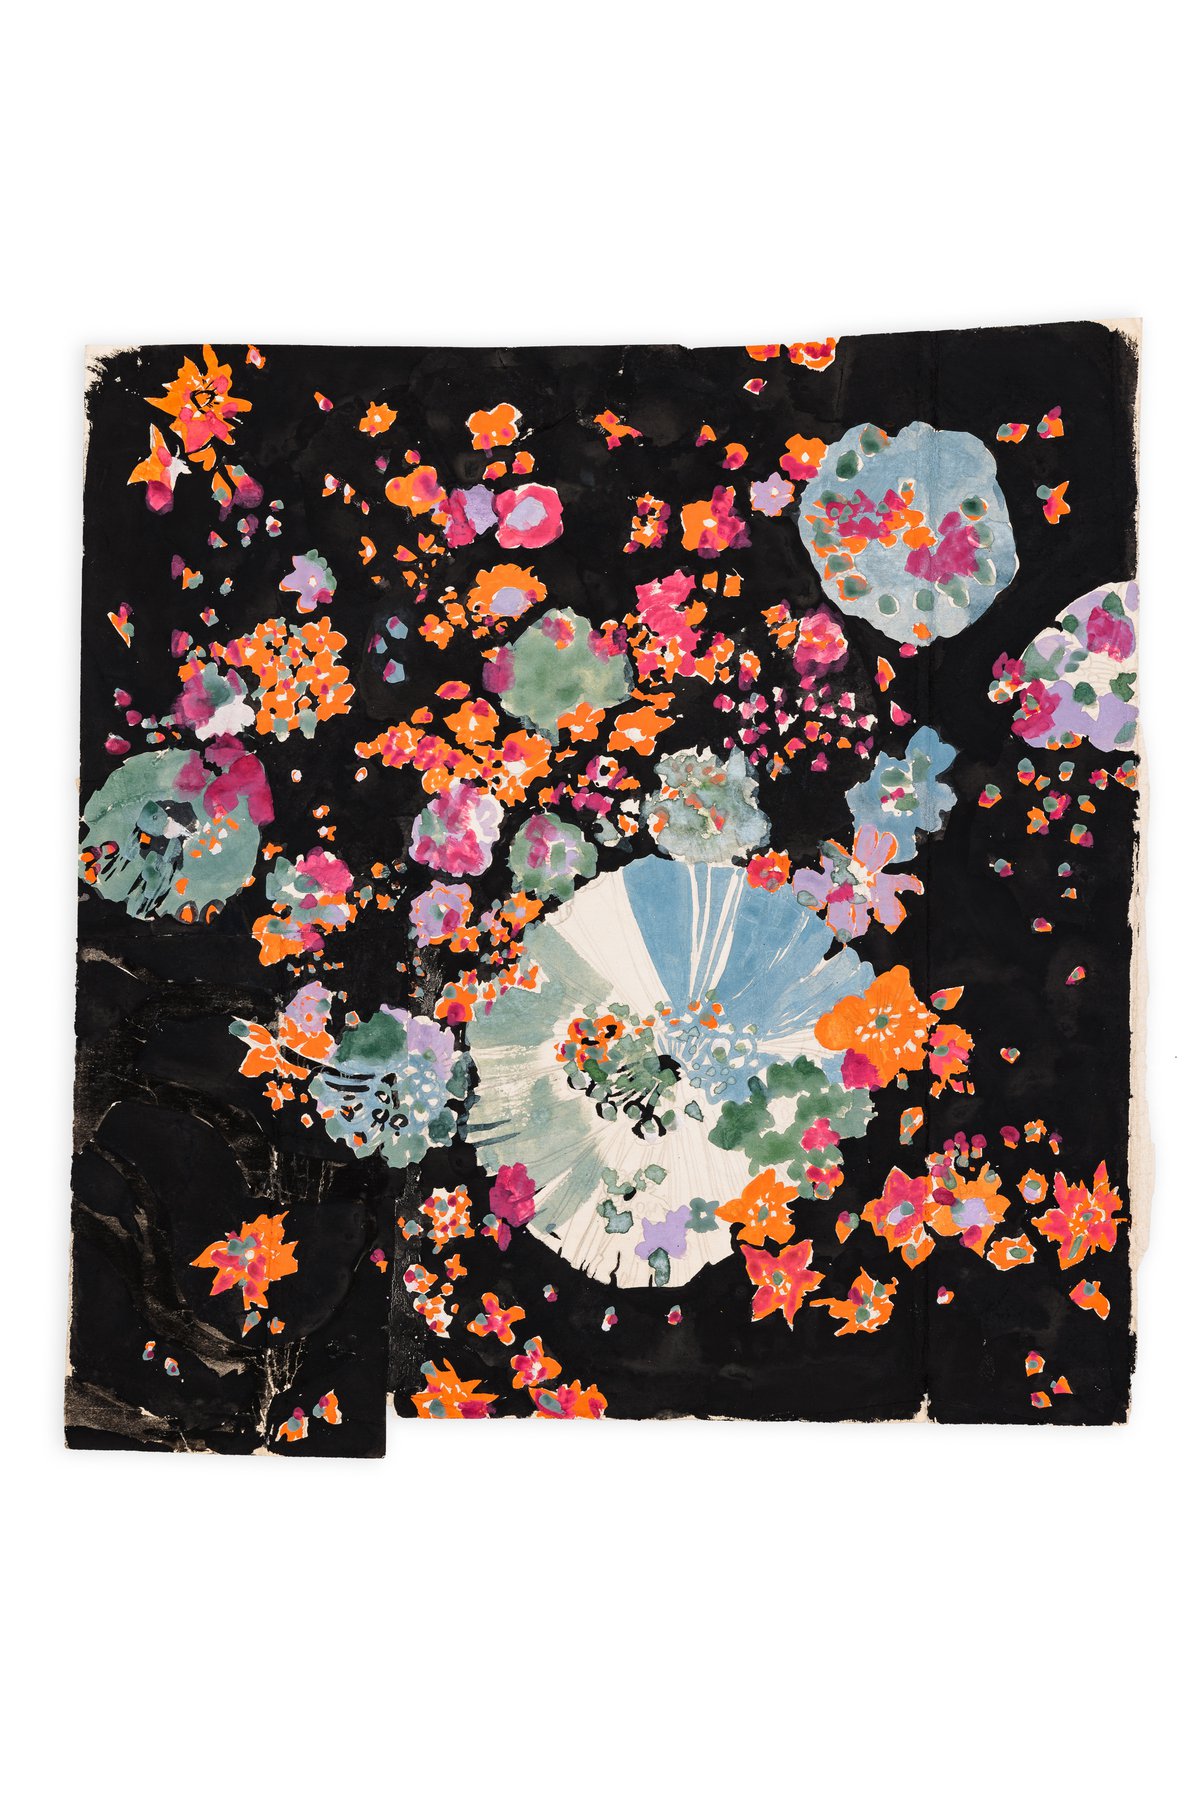 Anna AndreevaOriental Flowers, 1960sGouache on paper56 x 45 cm